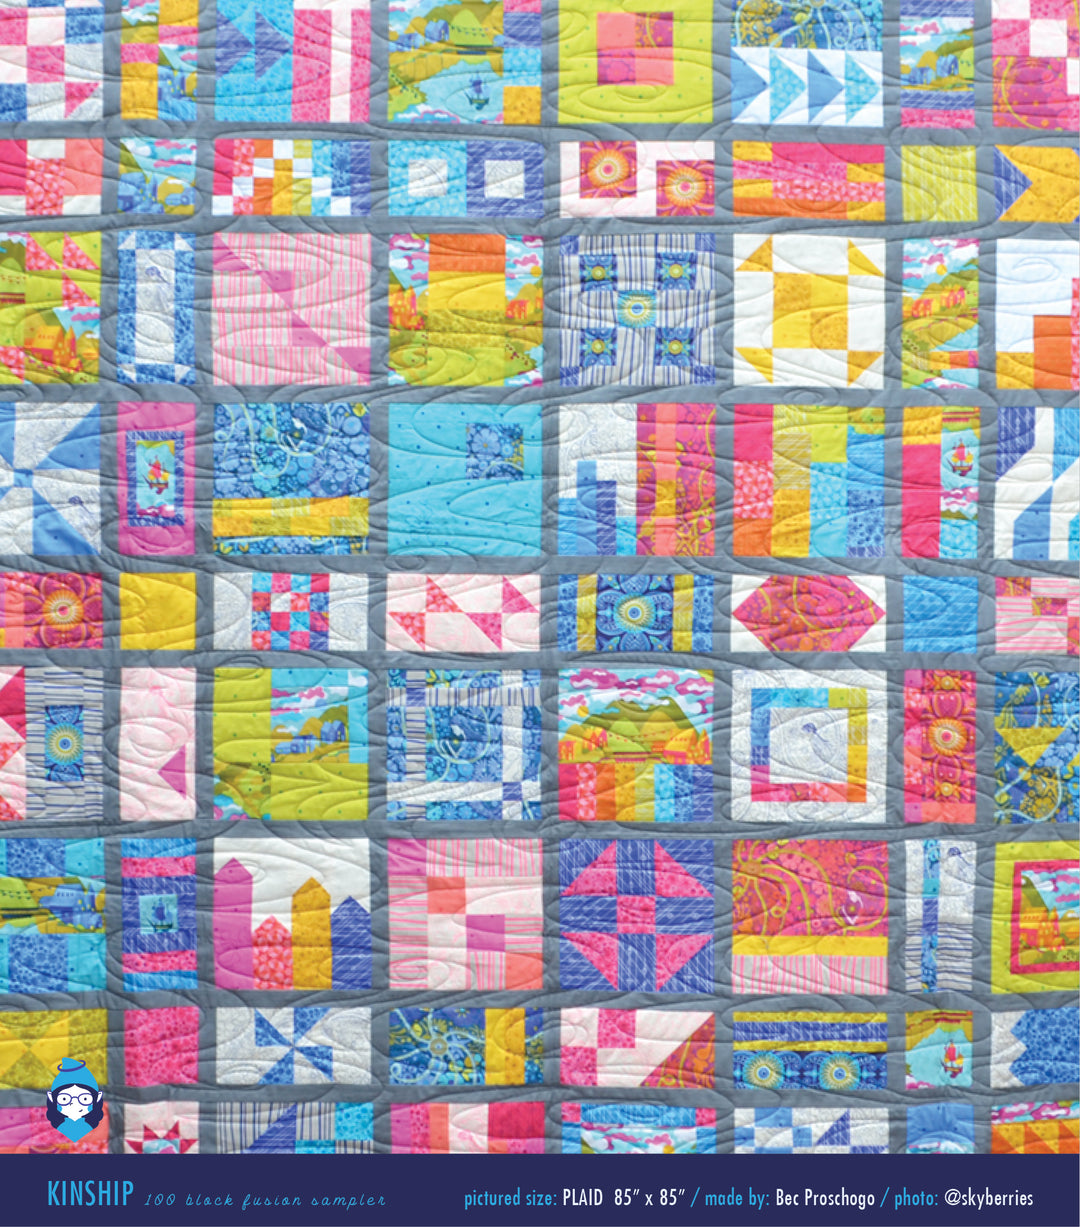 Fabric Fusion Quilting Pattern from the Editors of American Patchwork &  Quilting